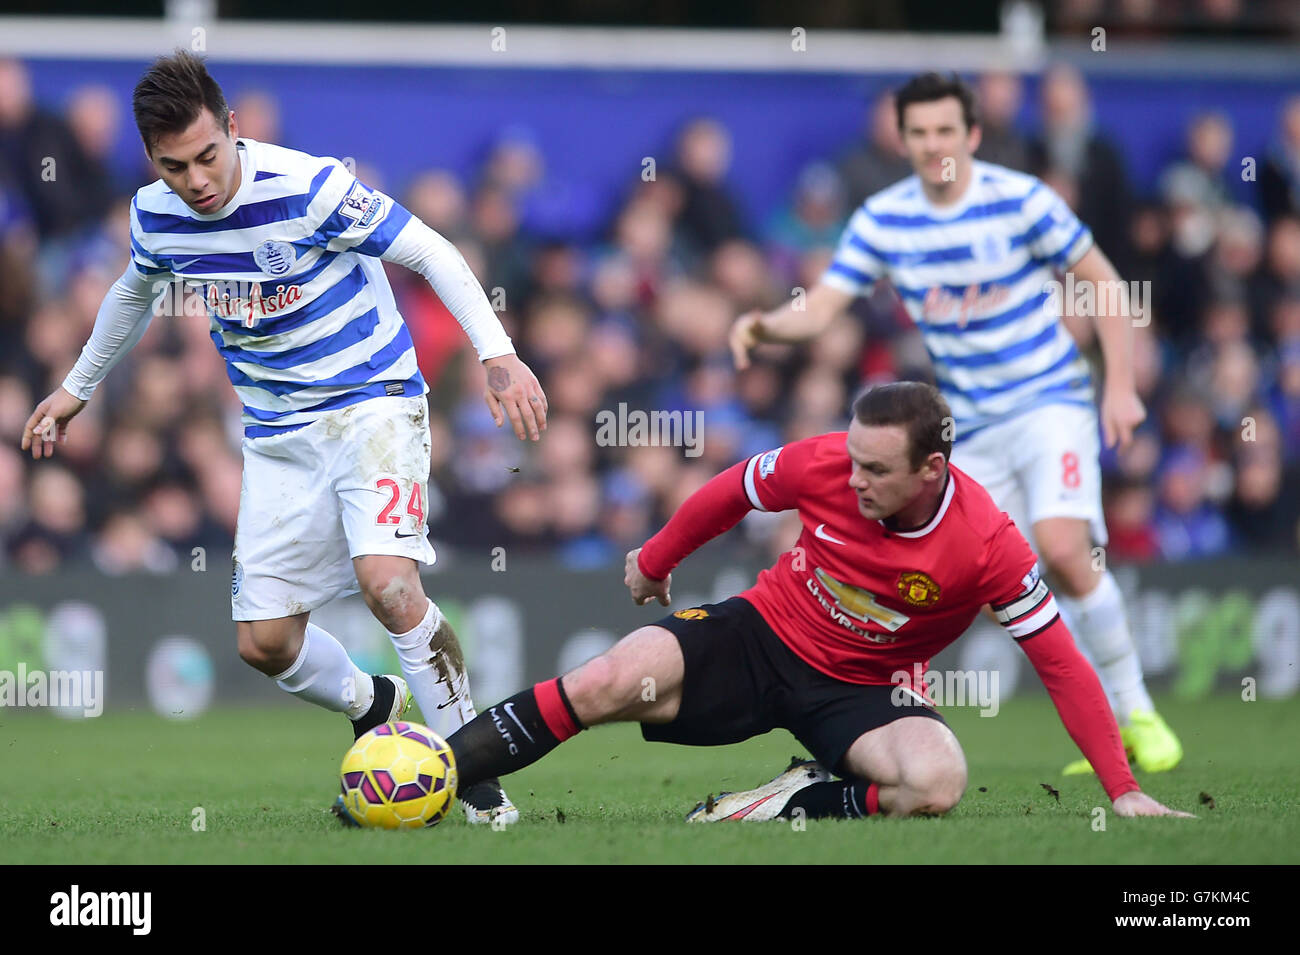 Manchester United's Wayne Rooney (right) and Queens Park Rangers' Eduardo Vargas (left) battle for the ball during the Barclays Premier League match at Loftus Road, London. PRESS ASSOCIATION Photo. Picture date: Saturday January 17, 2015. See PA story SOCCER QPR. Picture credit should read: Adam Davy/PA Wire. Stock Photo